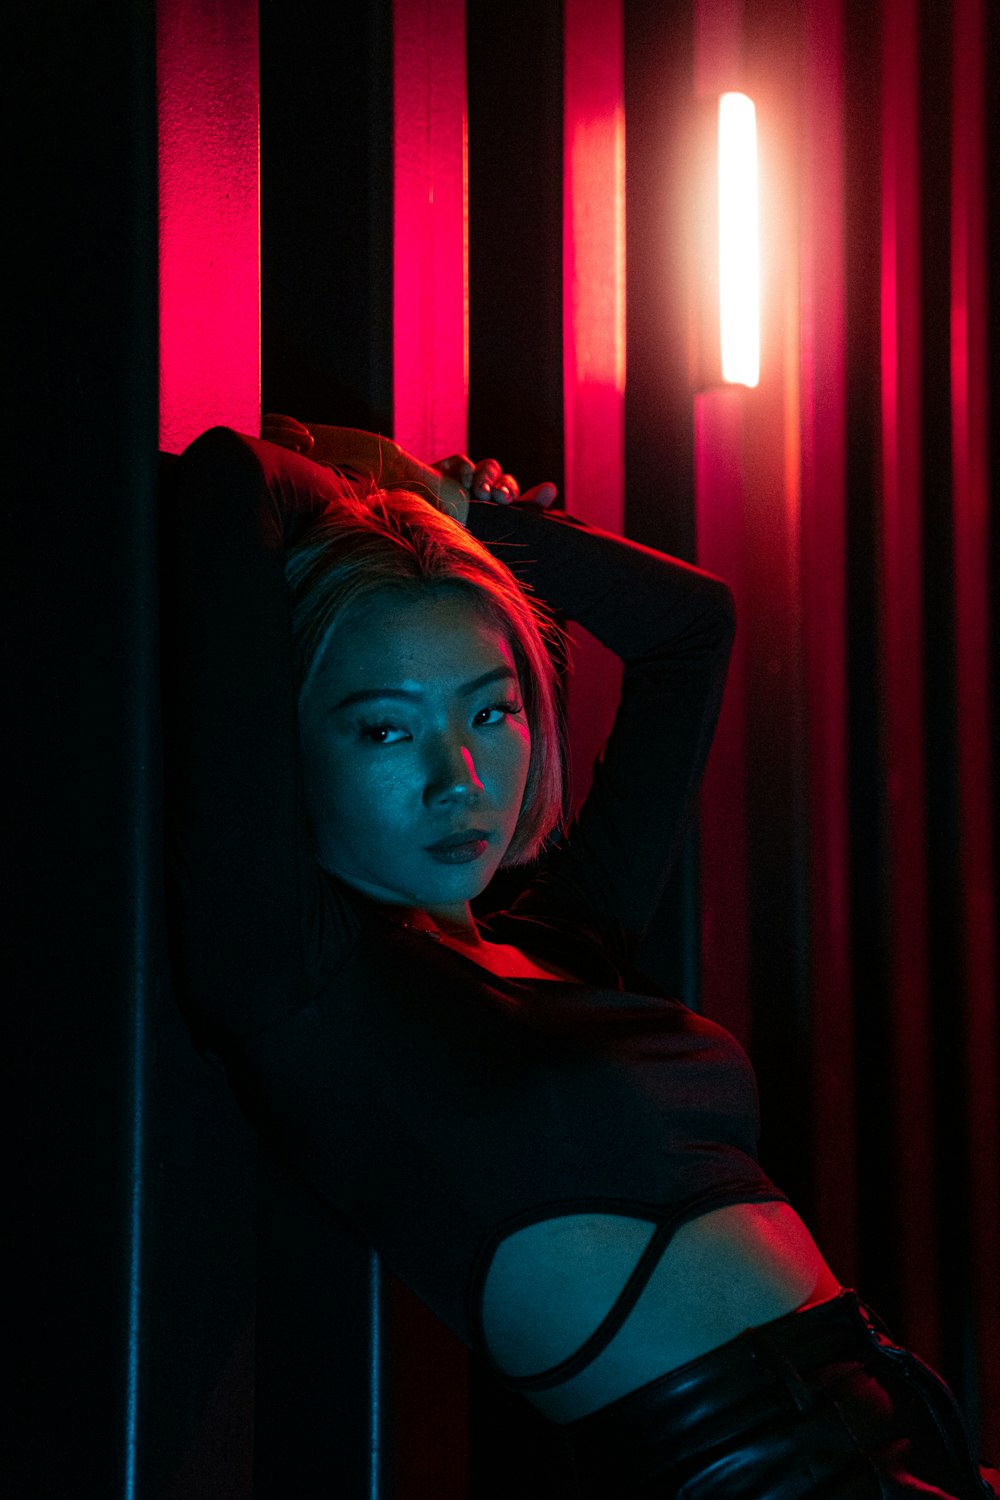 a woman leaning against a wall in a dark room